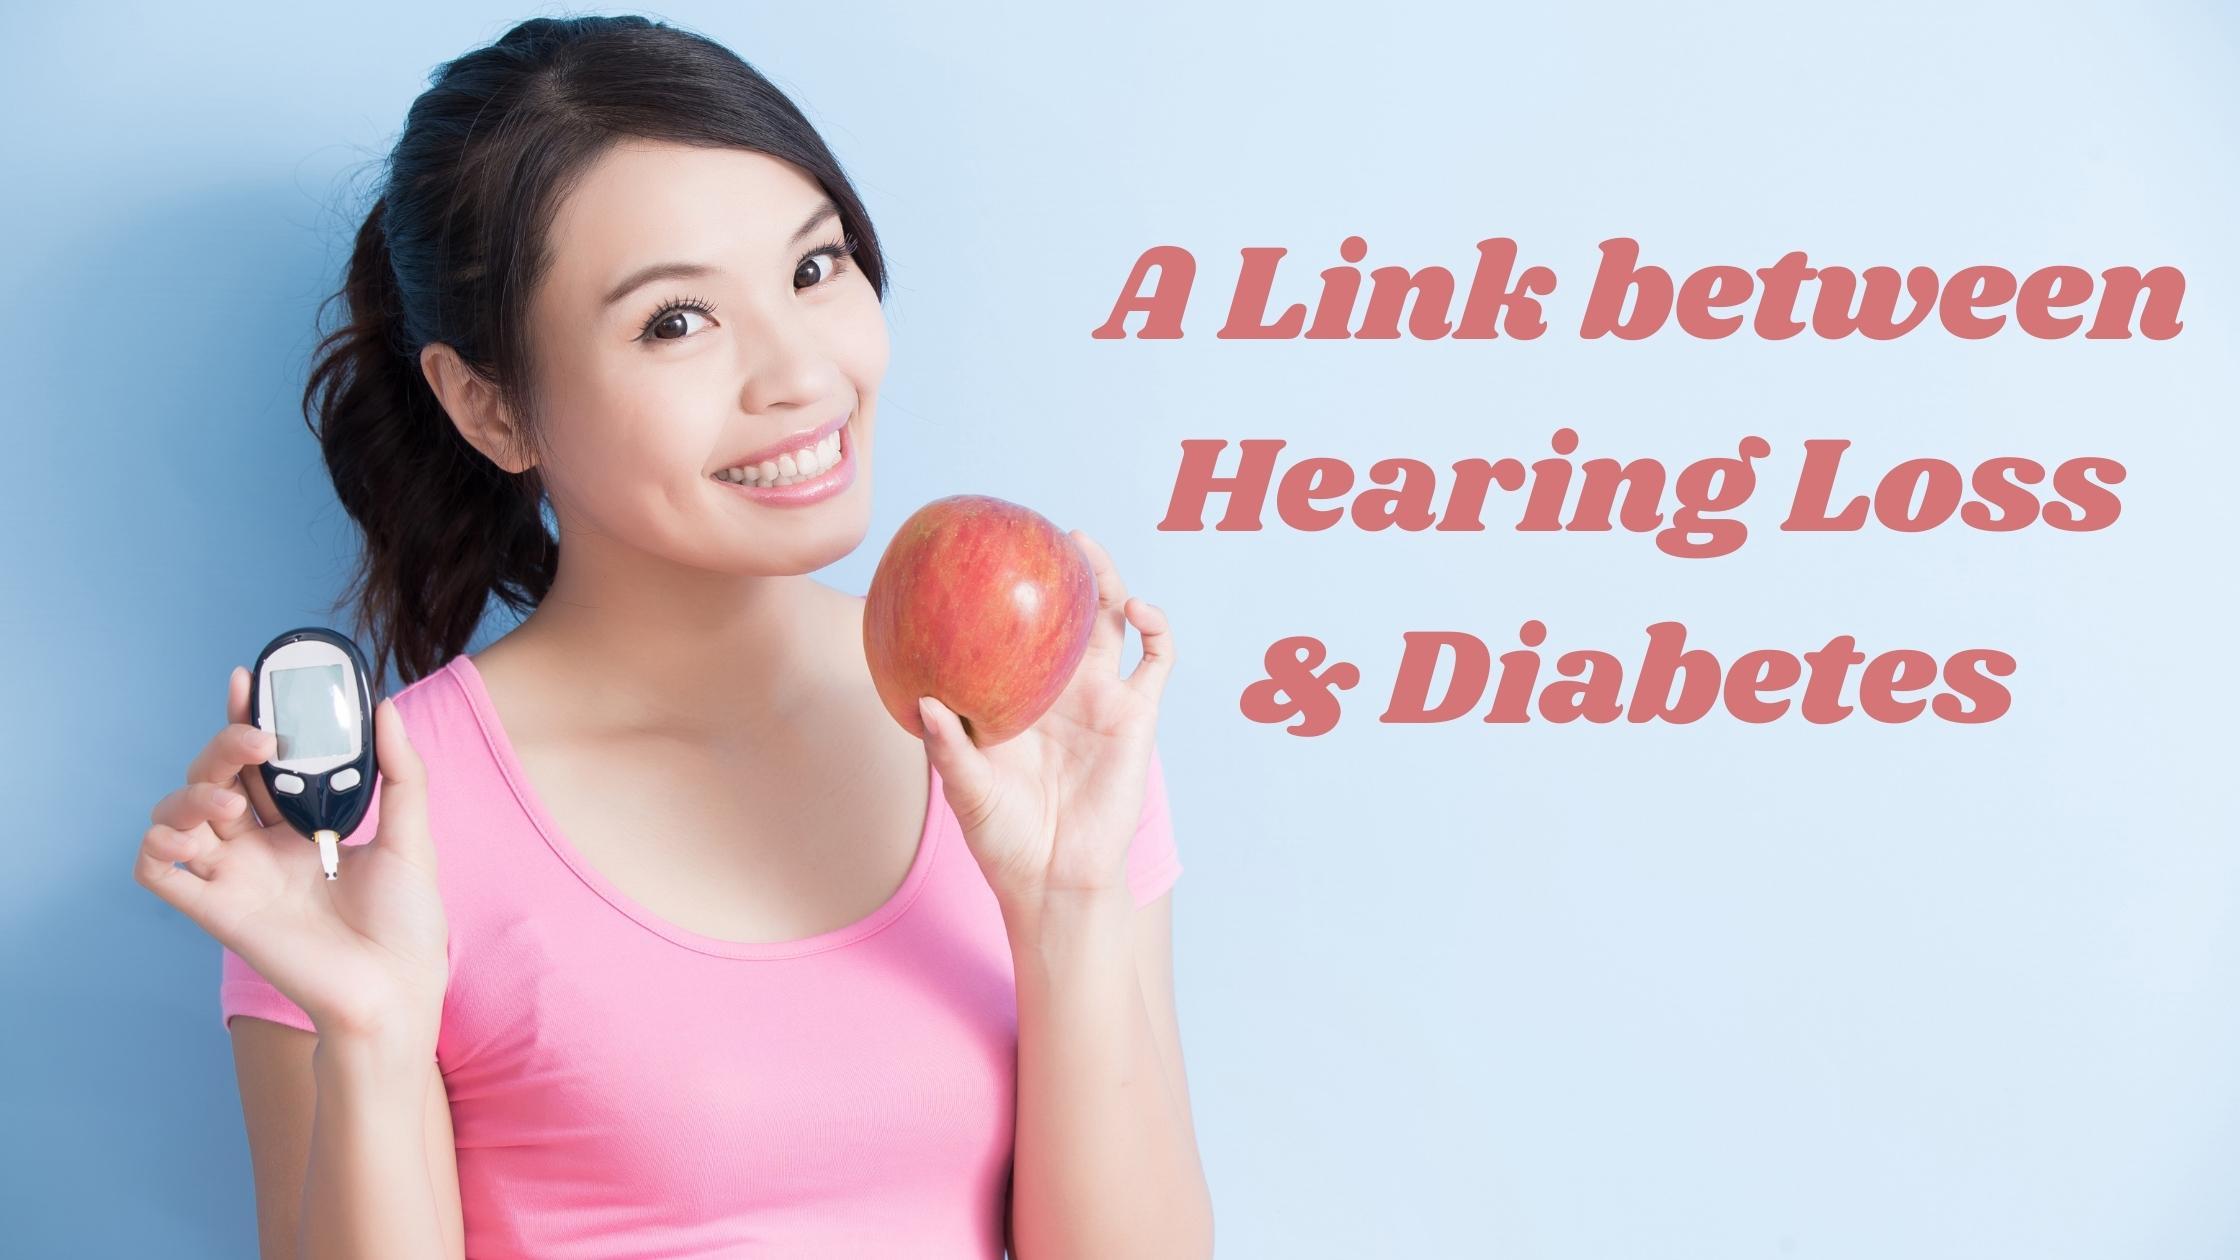 Featured image for “A Link between Hearing Loss & Diabetes”